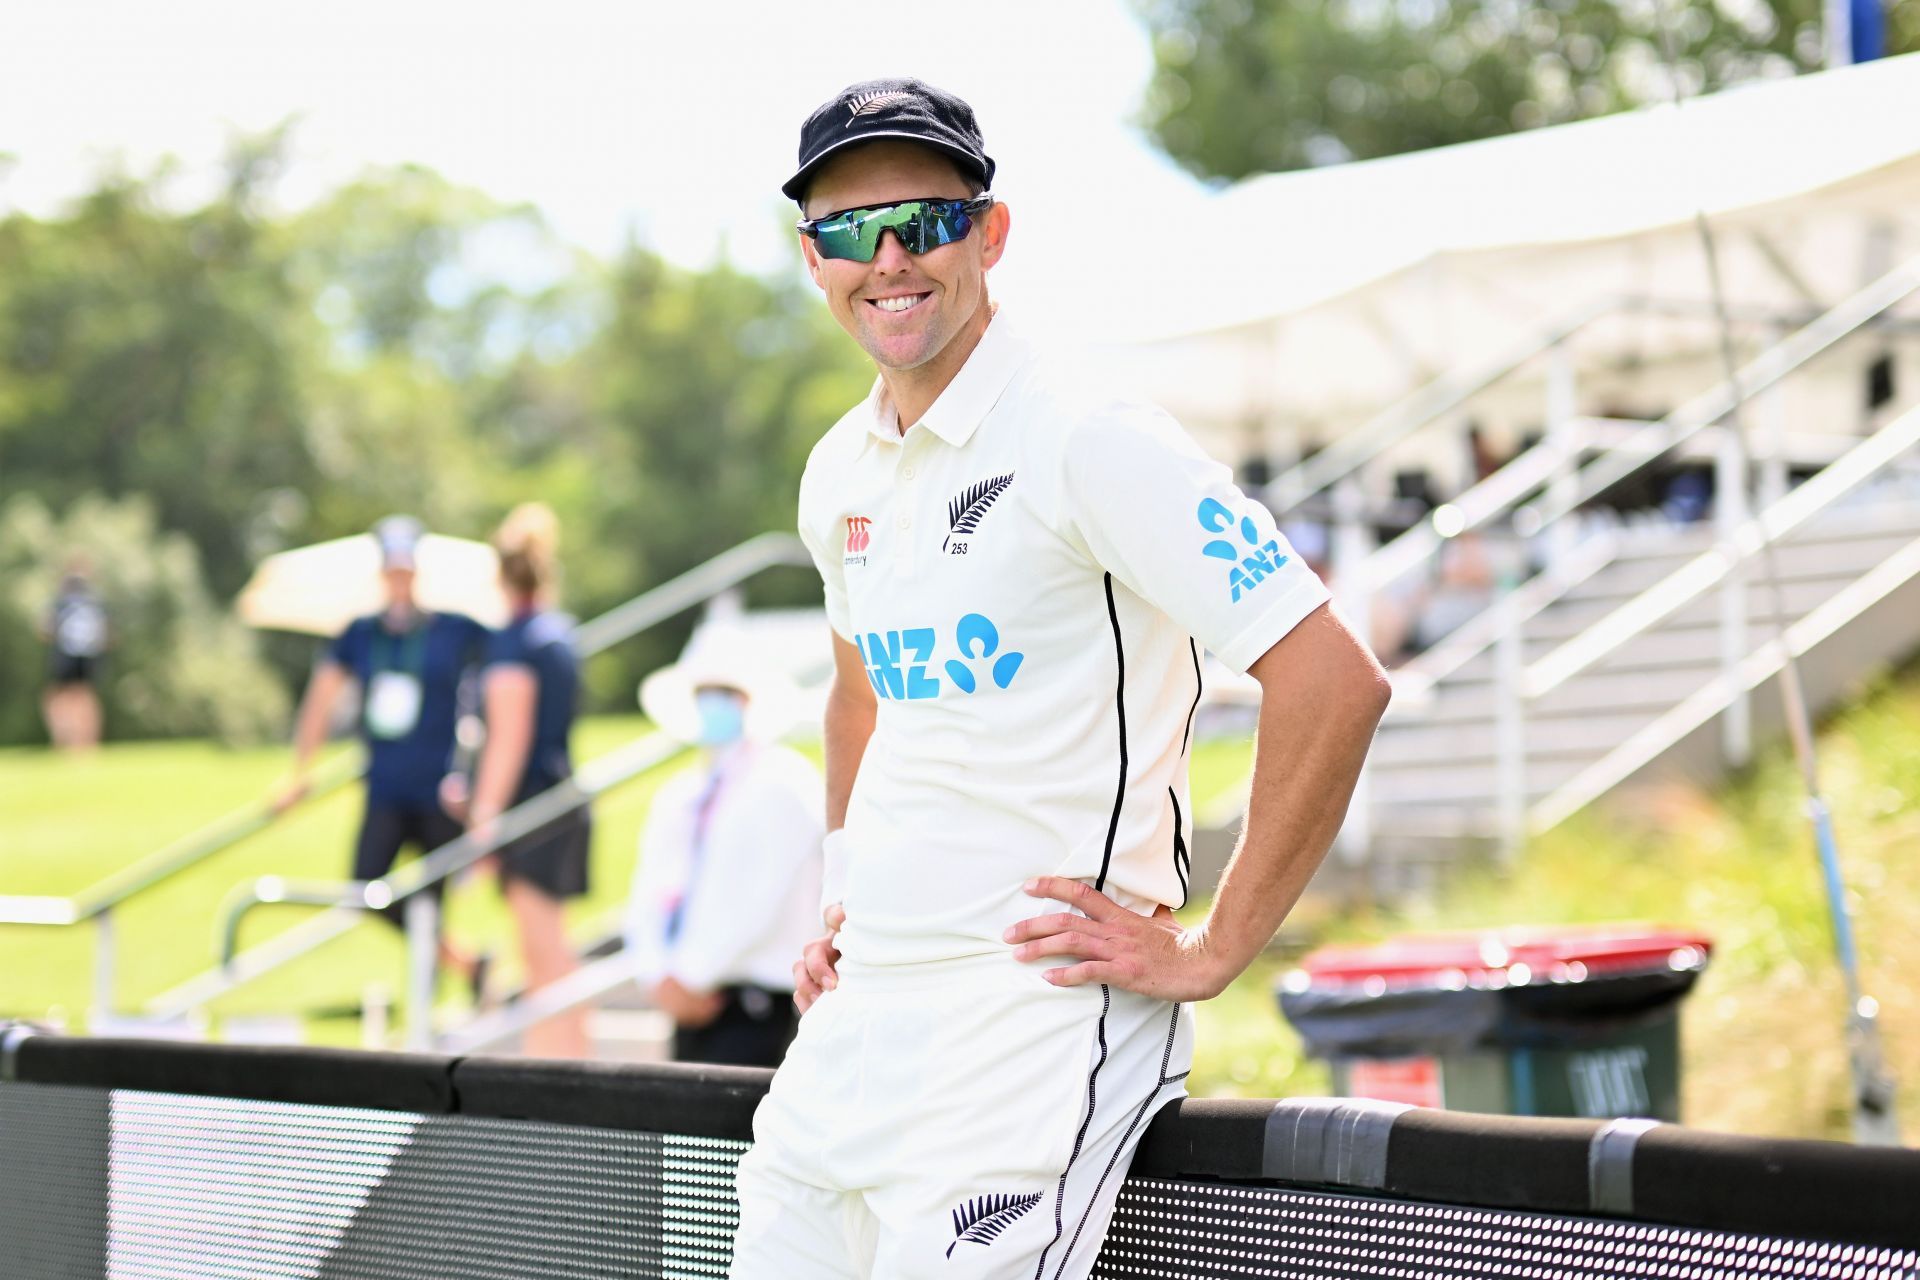 We may have seen the last of Trent Boult in test matches.